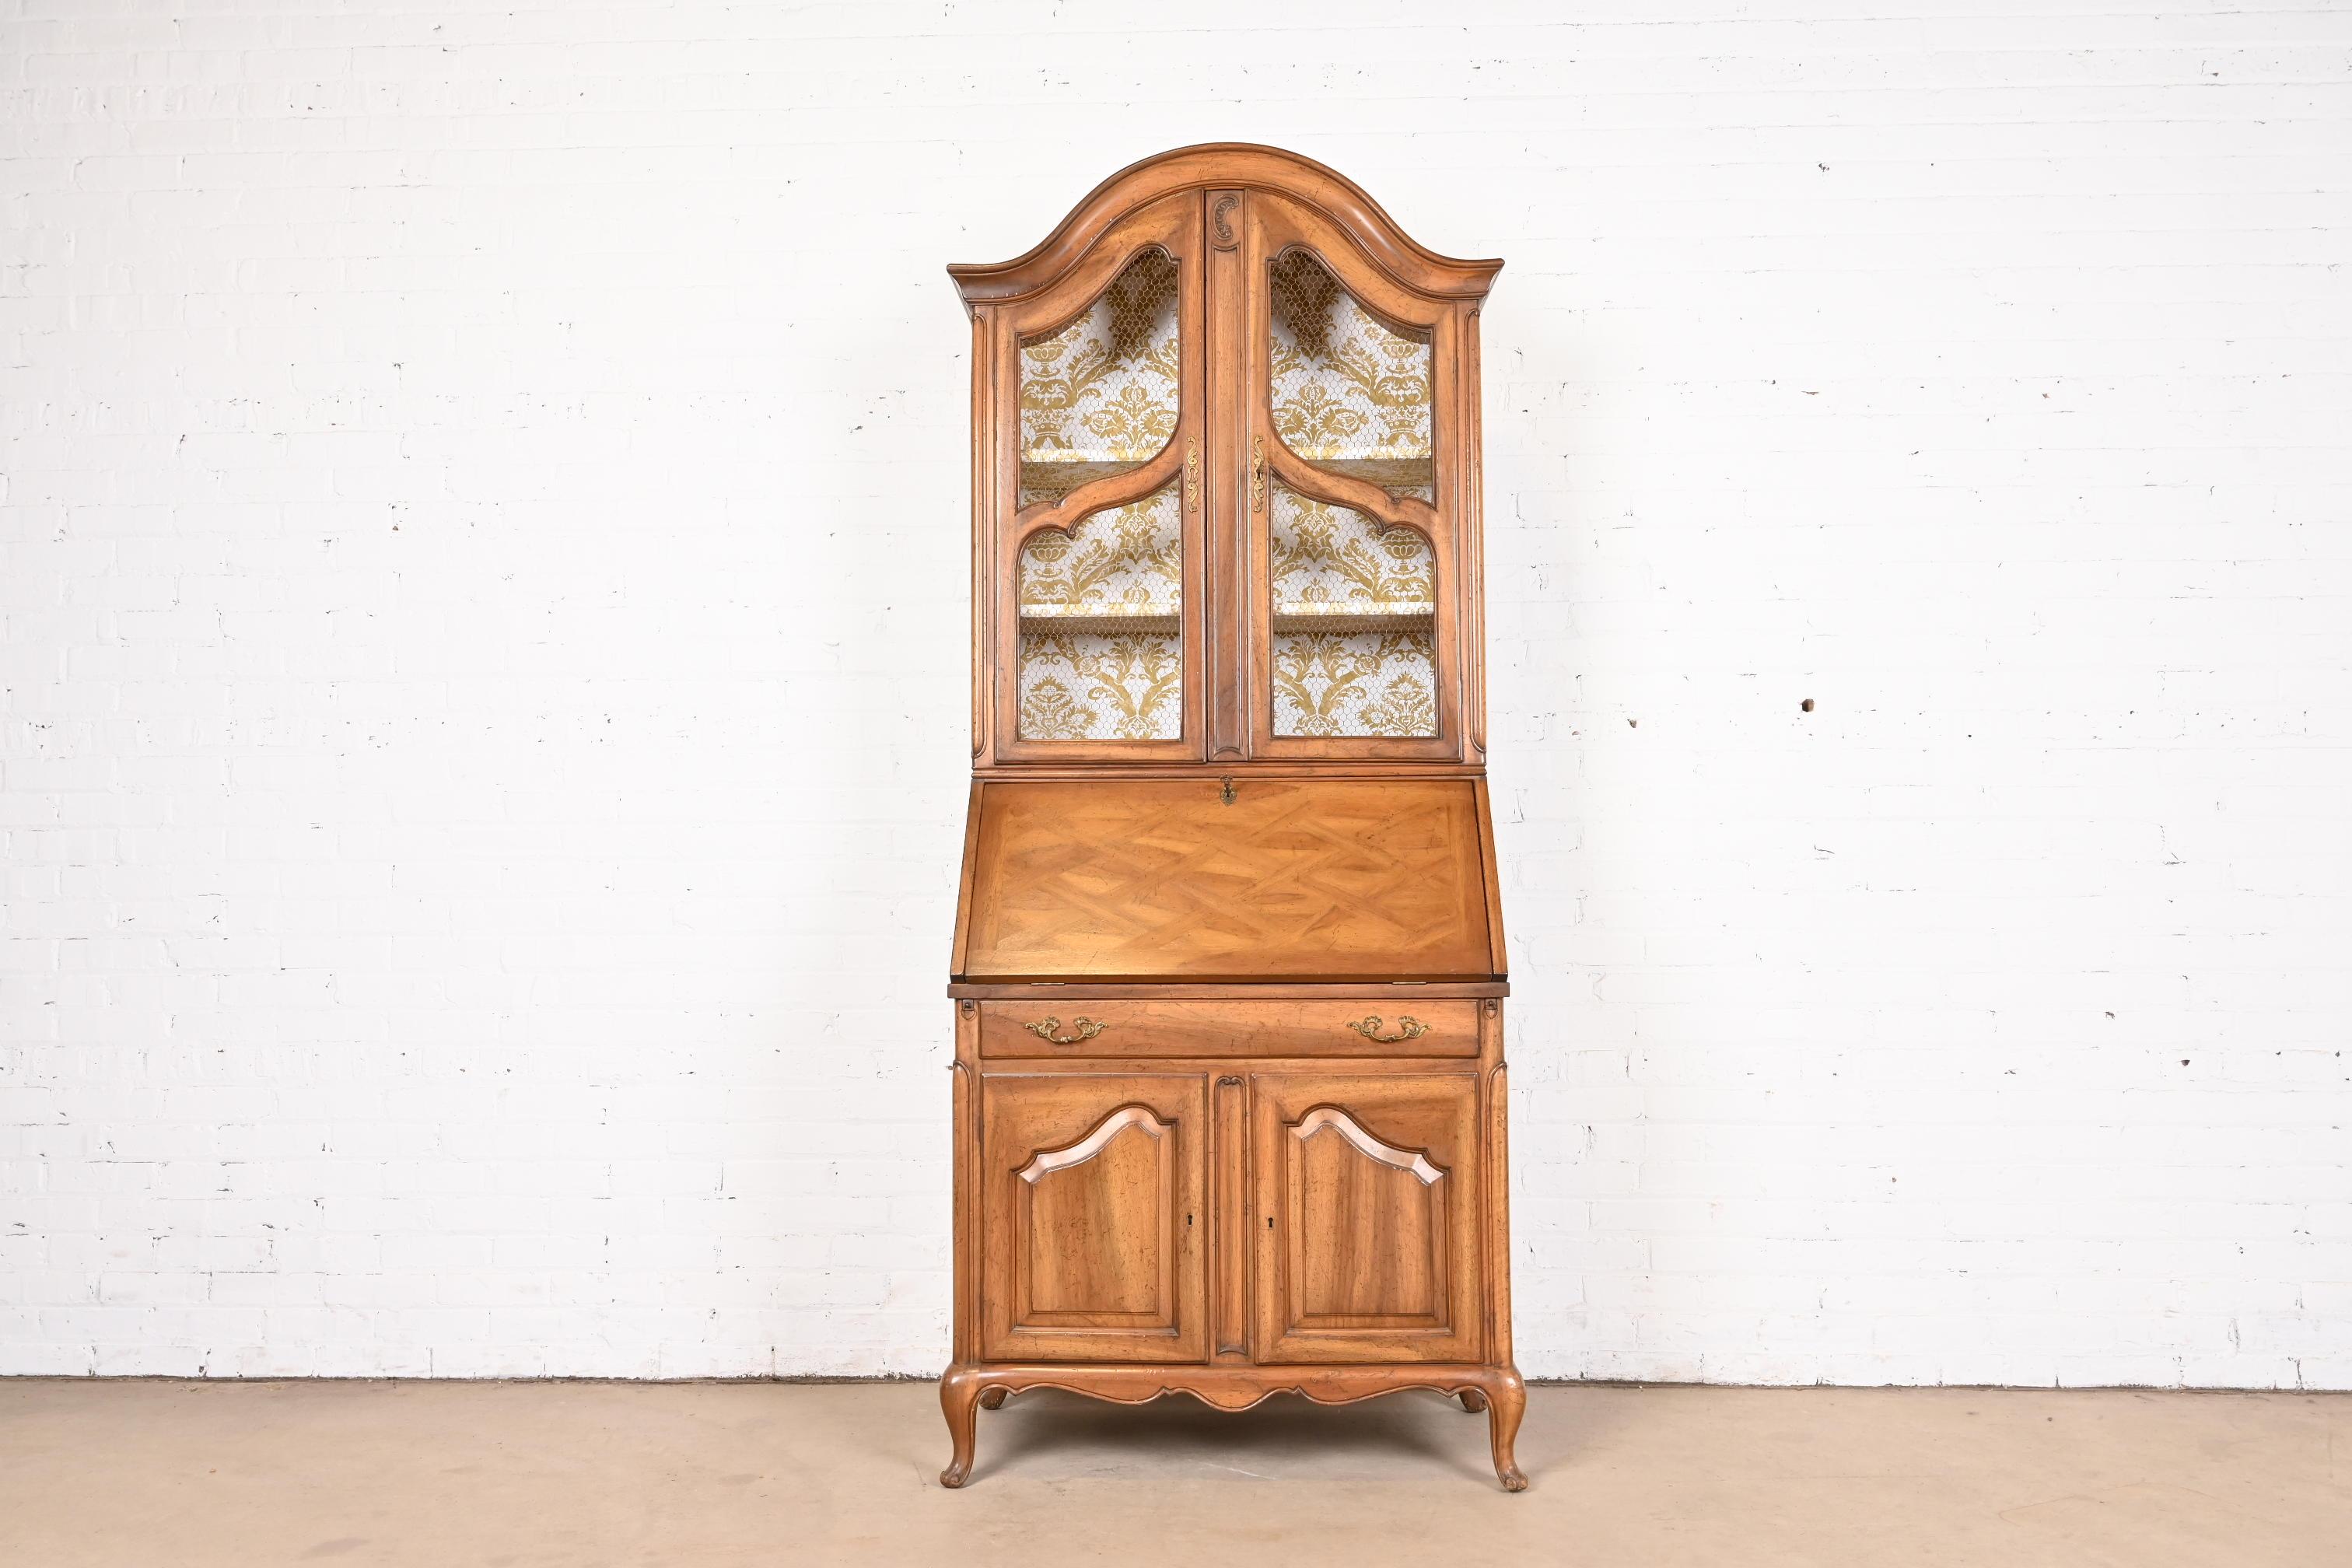 A gorgeous French Provincial Louis XV style bureau with drop front secretary desk and bookcase hutch top

In the manner of Baker Furniture

USA, Circa 1960s

Carved walnut, with original brass hardware, and embossed leather writing surface. Cabinet